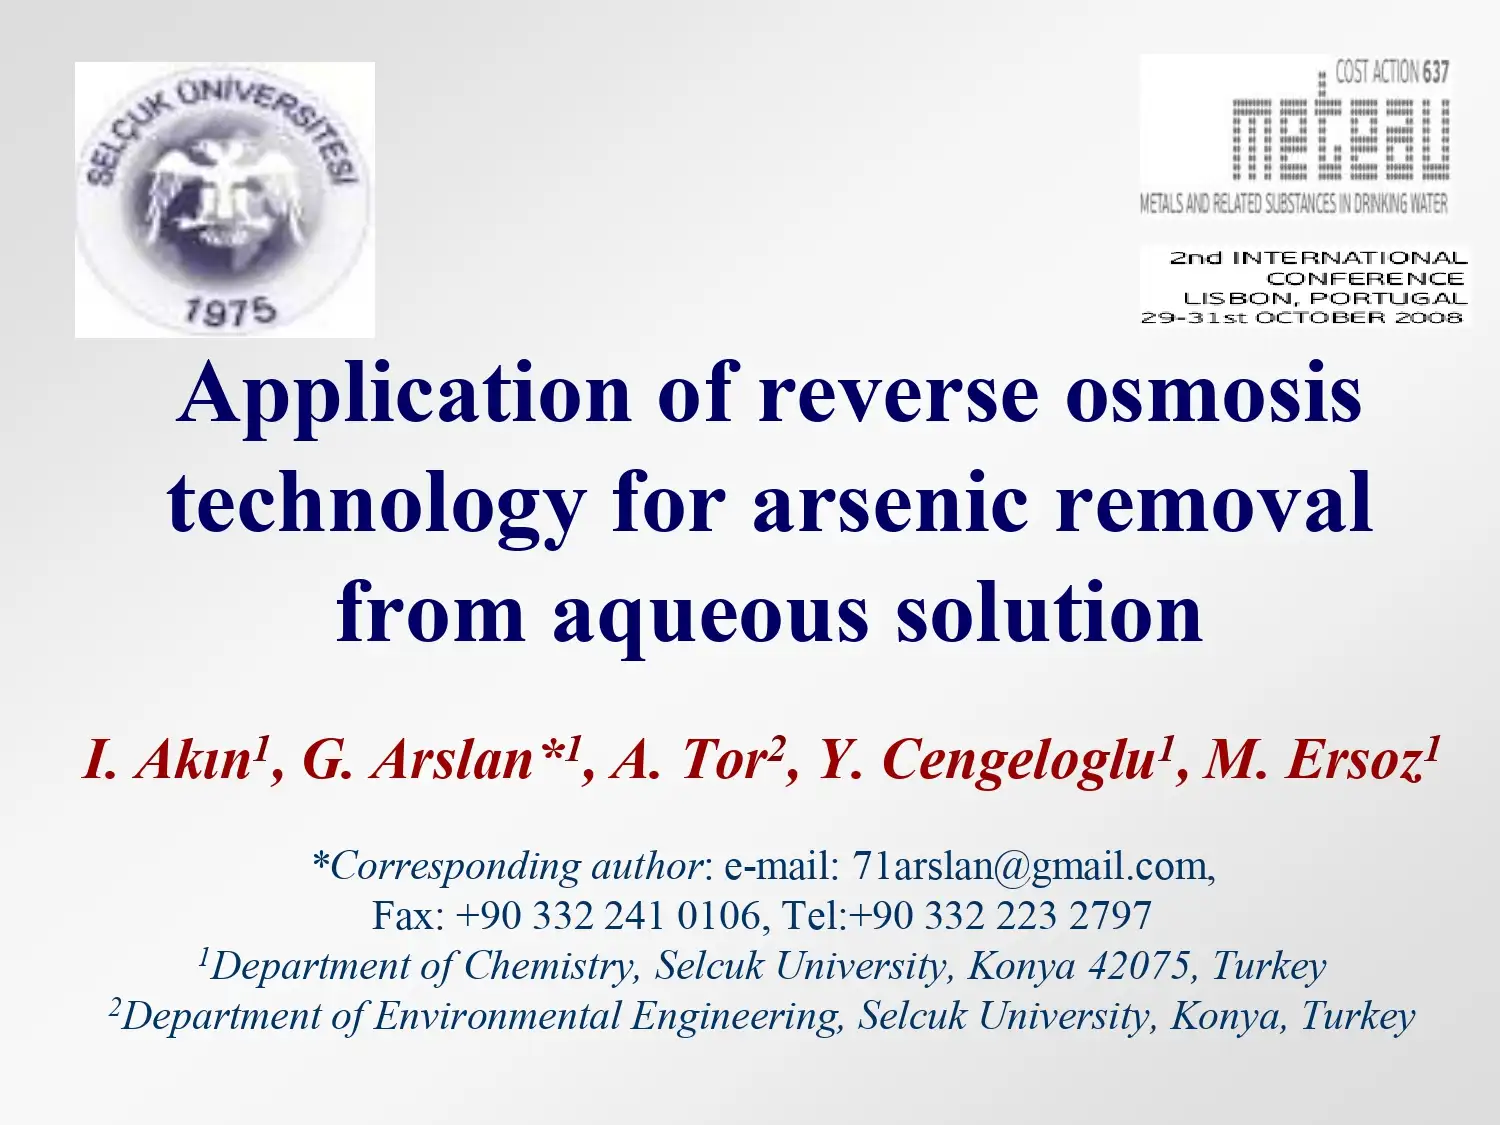 Application of Reverse Osmosis Technology for Arsenic Removal from Aqueous Solution